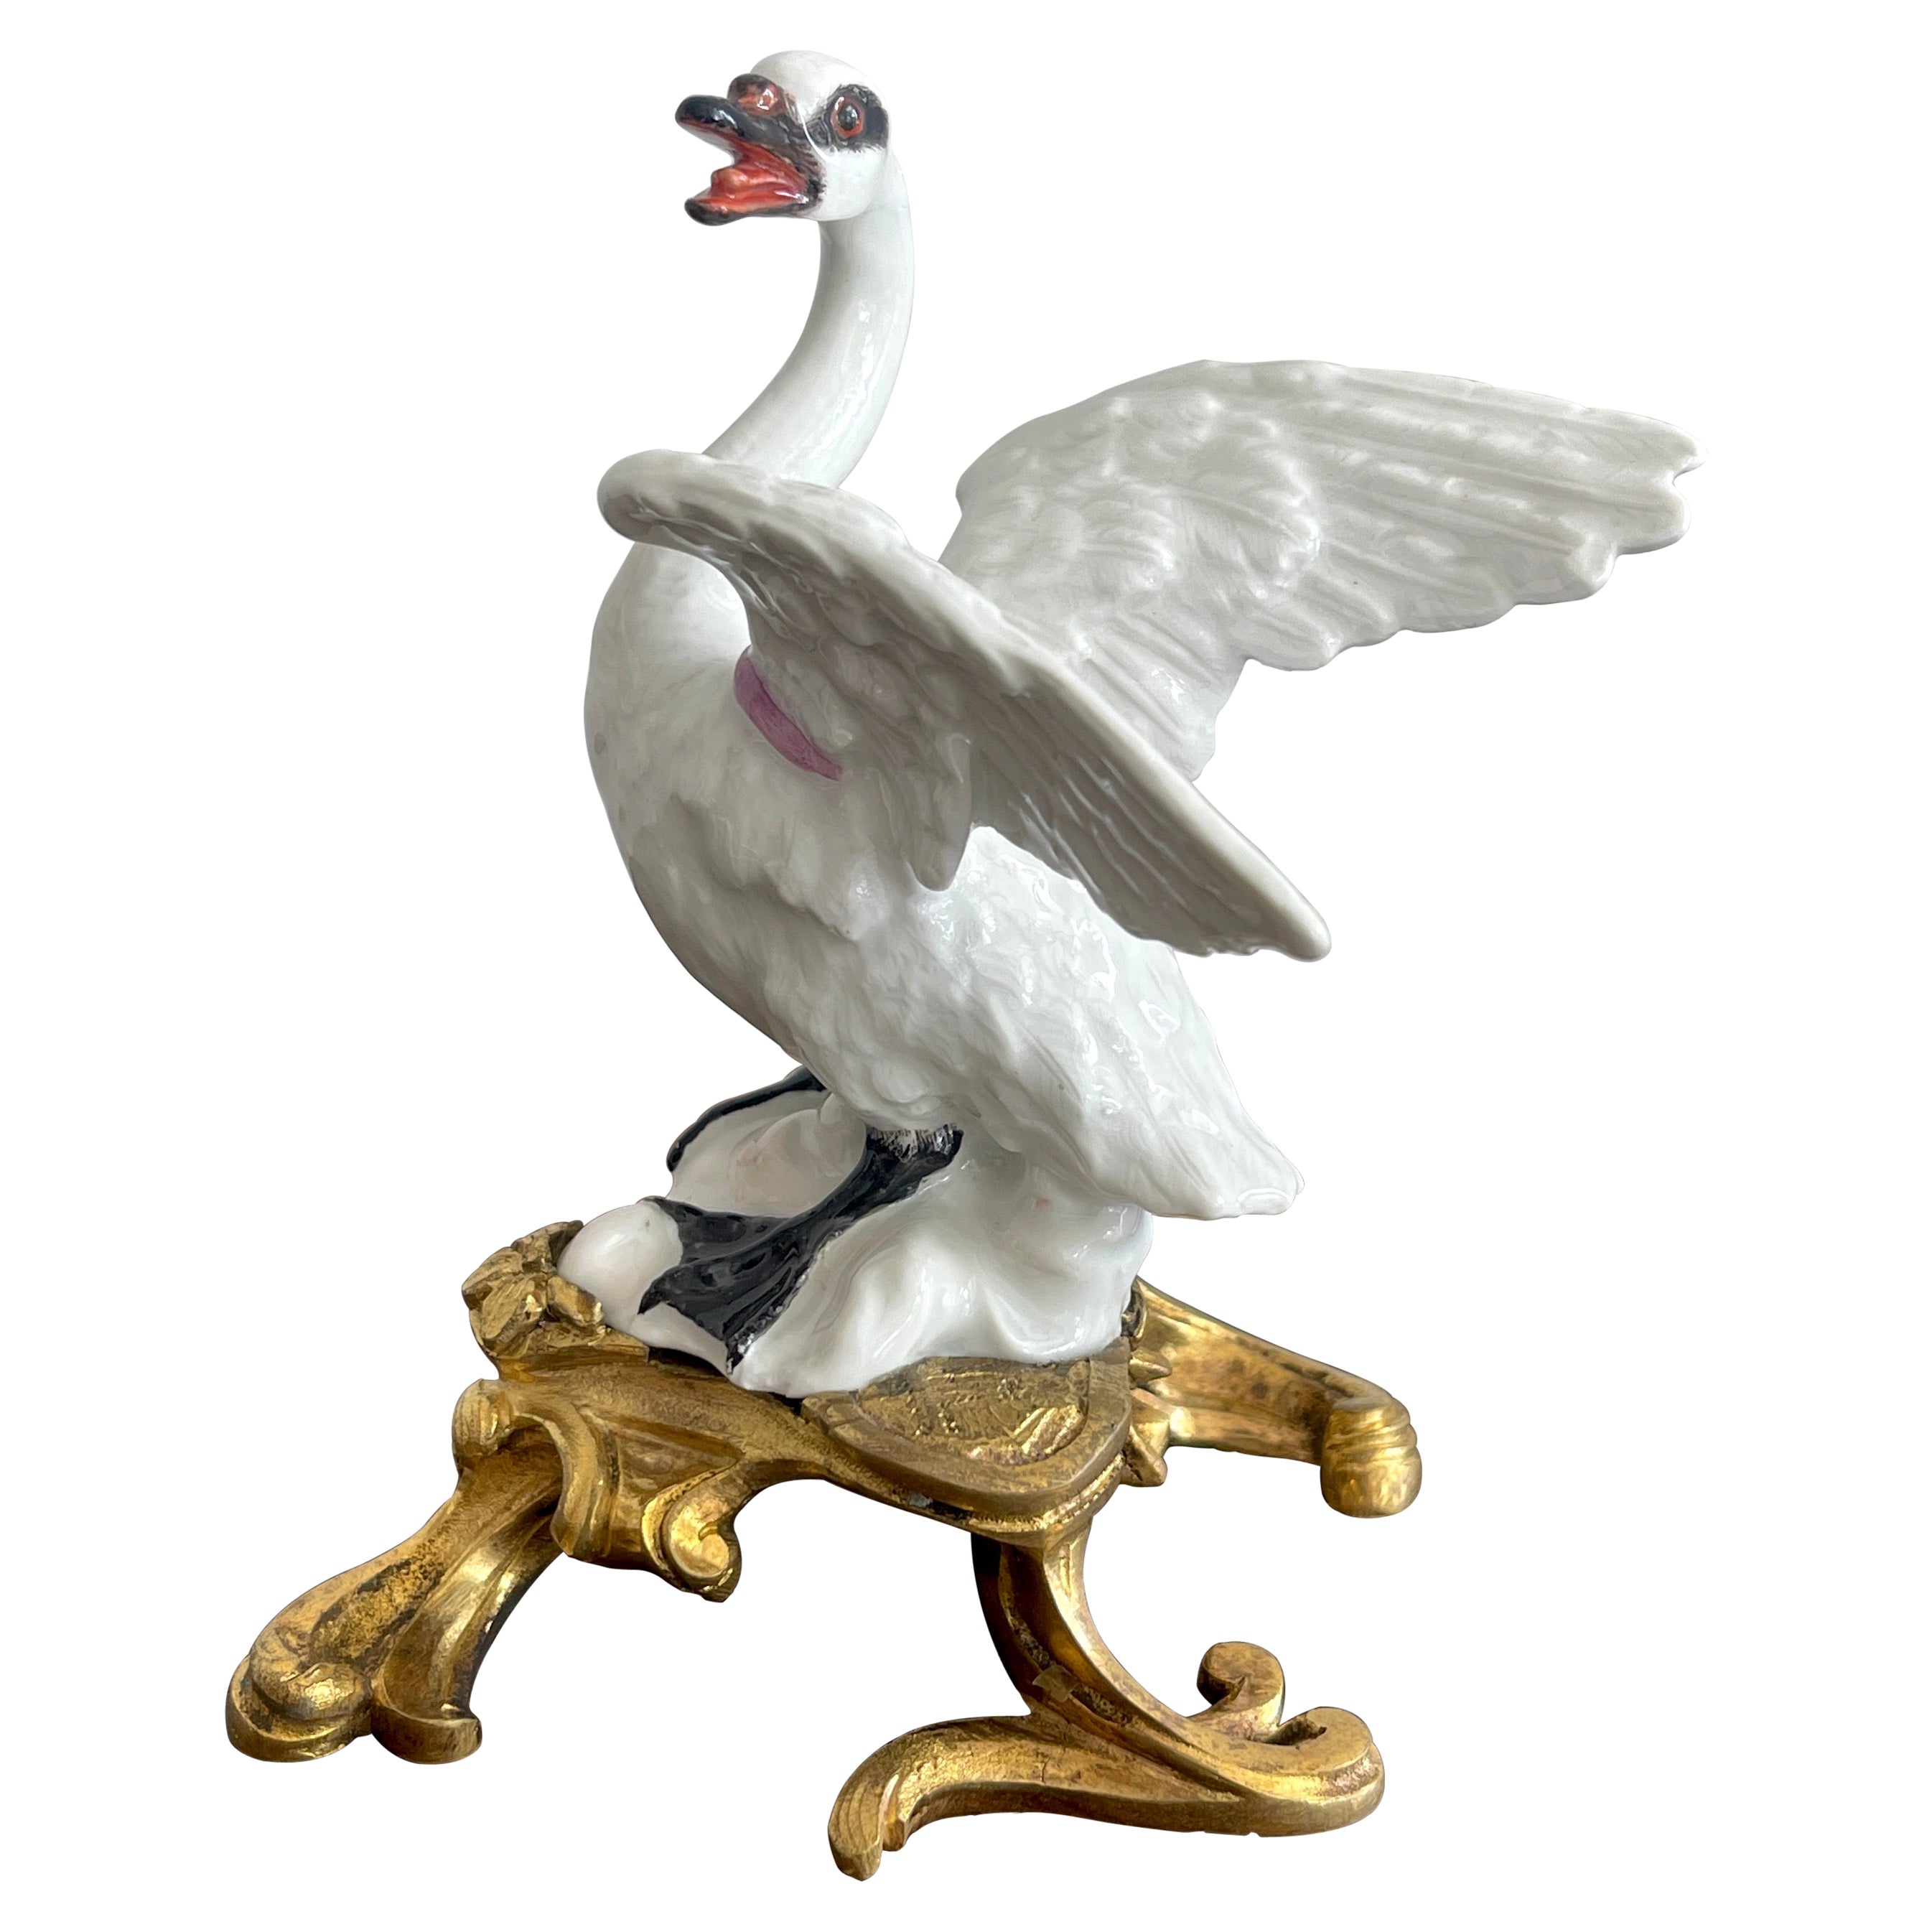 18th C Meissen Ormolu Mounted Swan with Harness, Modeled by J.J. Kandler